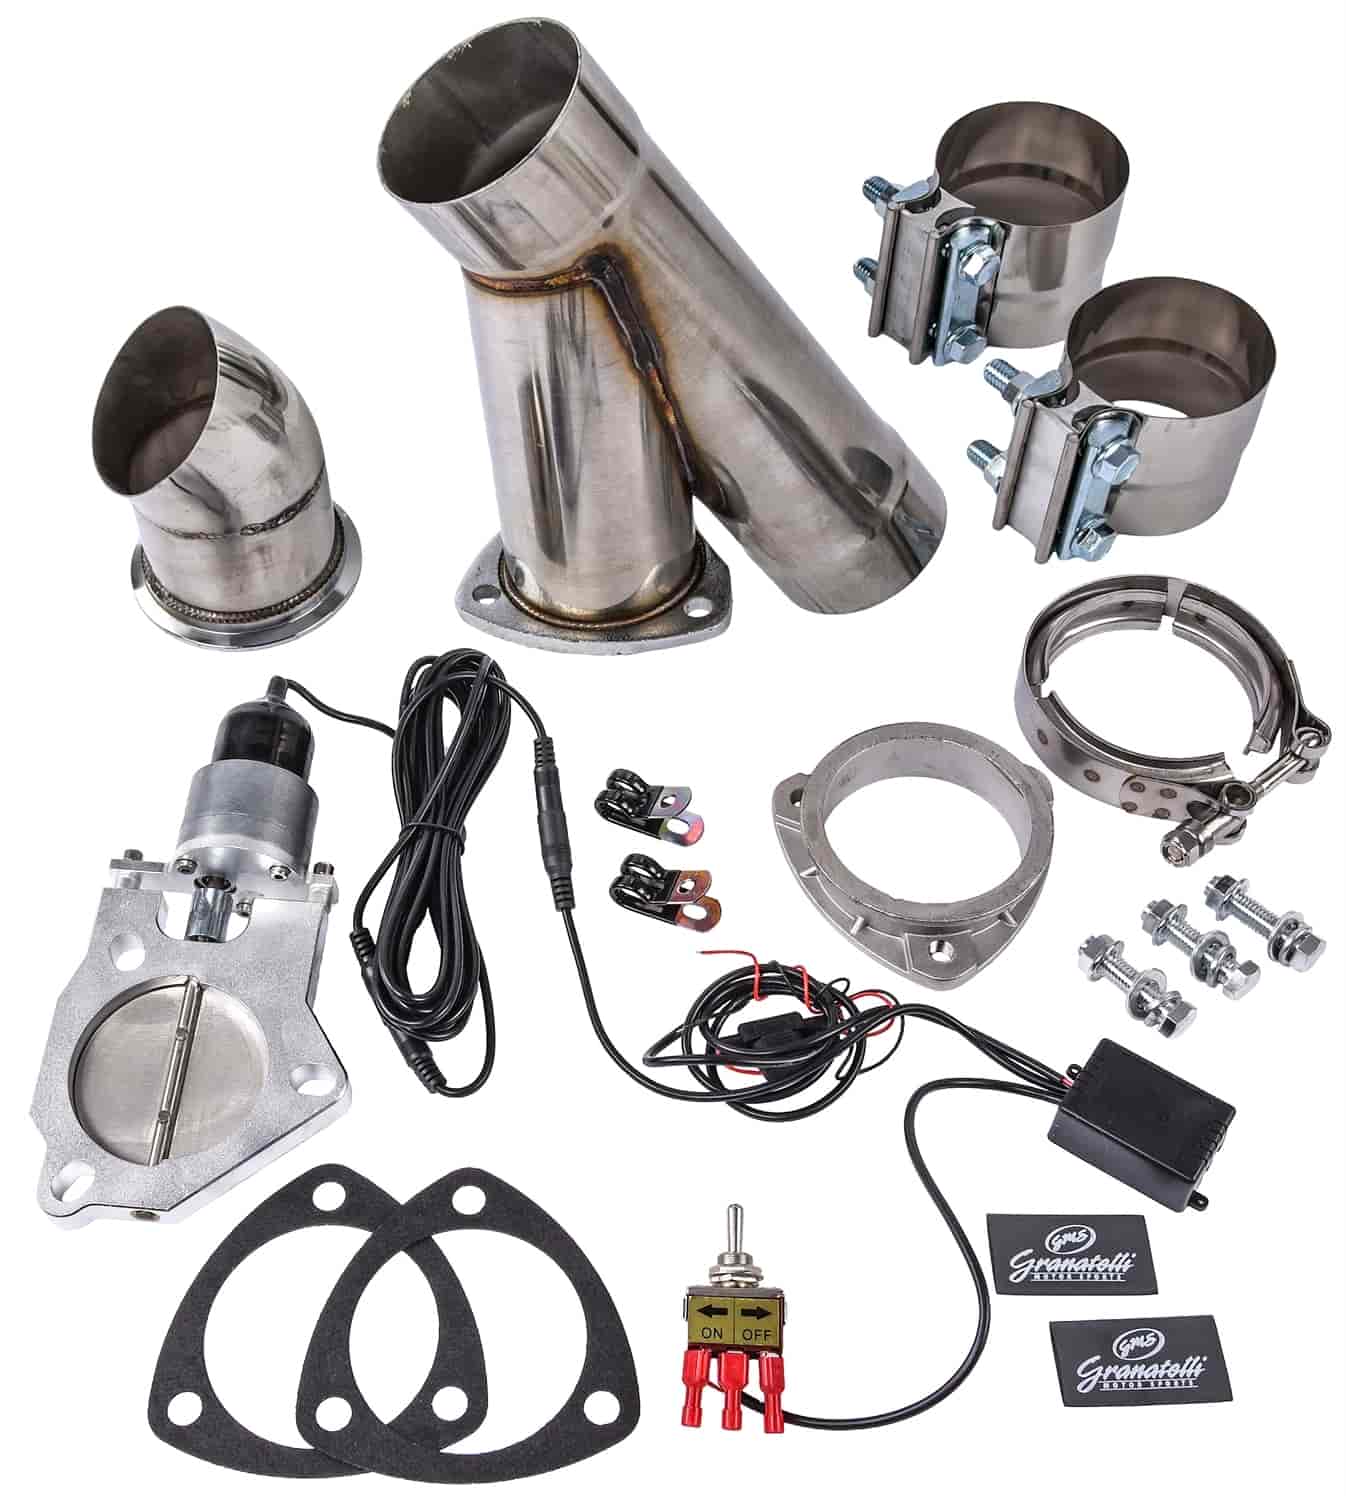 Electronic Stainless Steel Exhaust Cutout System for 2 1/2 in. Single Exhaust (Slip-Fit)